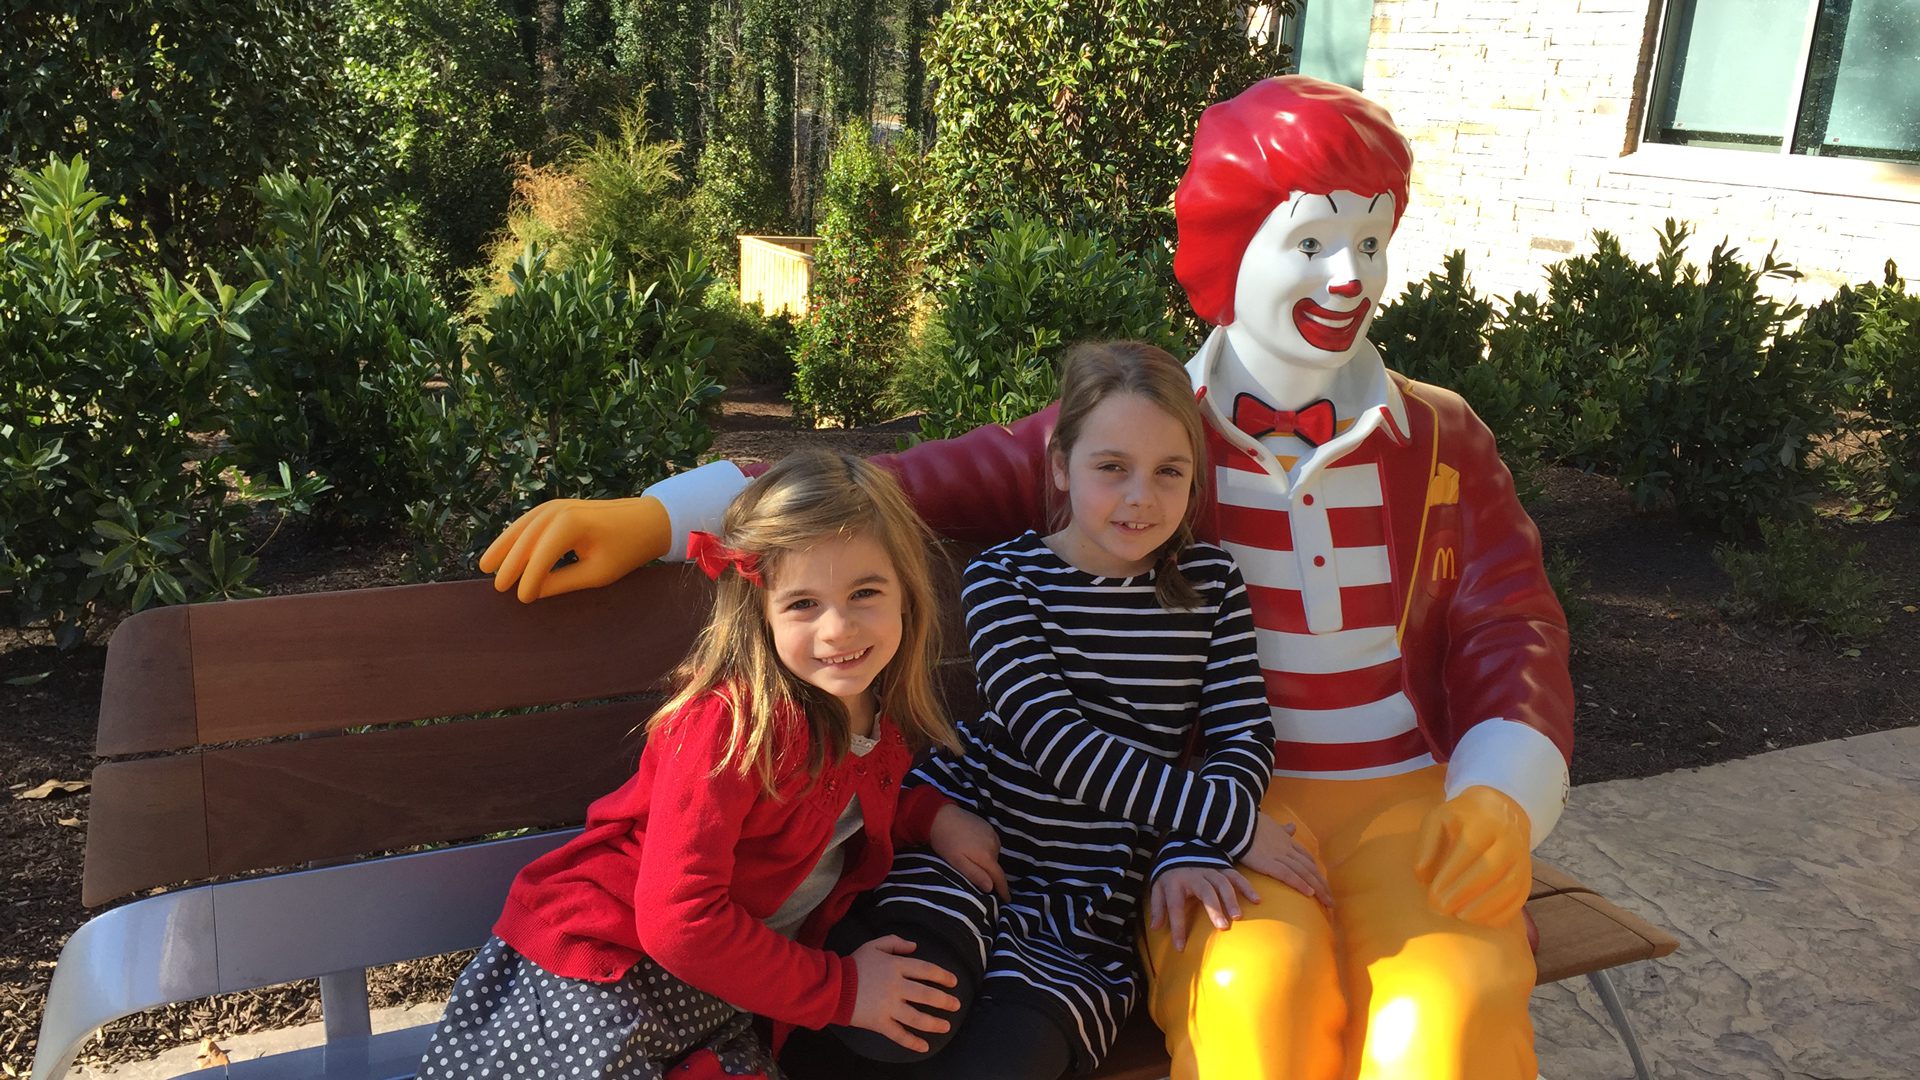 Little Girls on Bench with Ronald